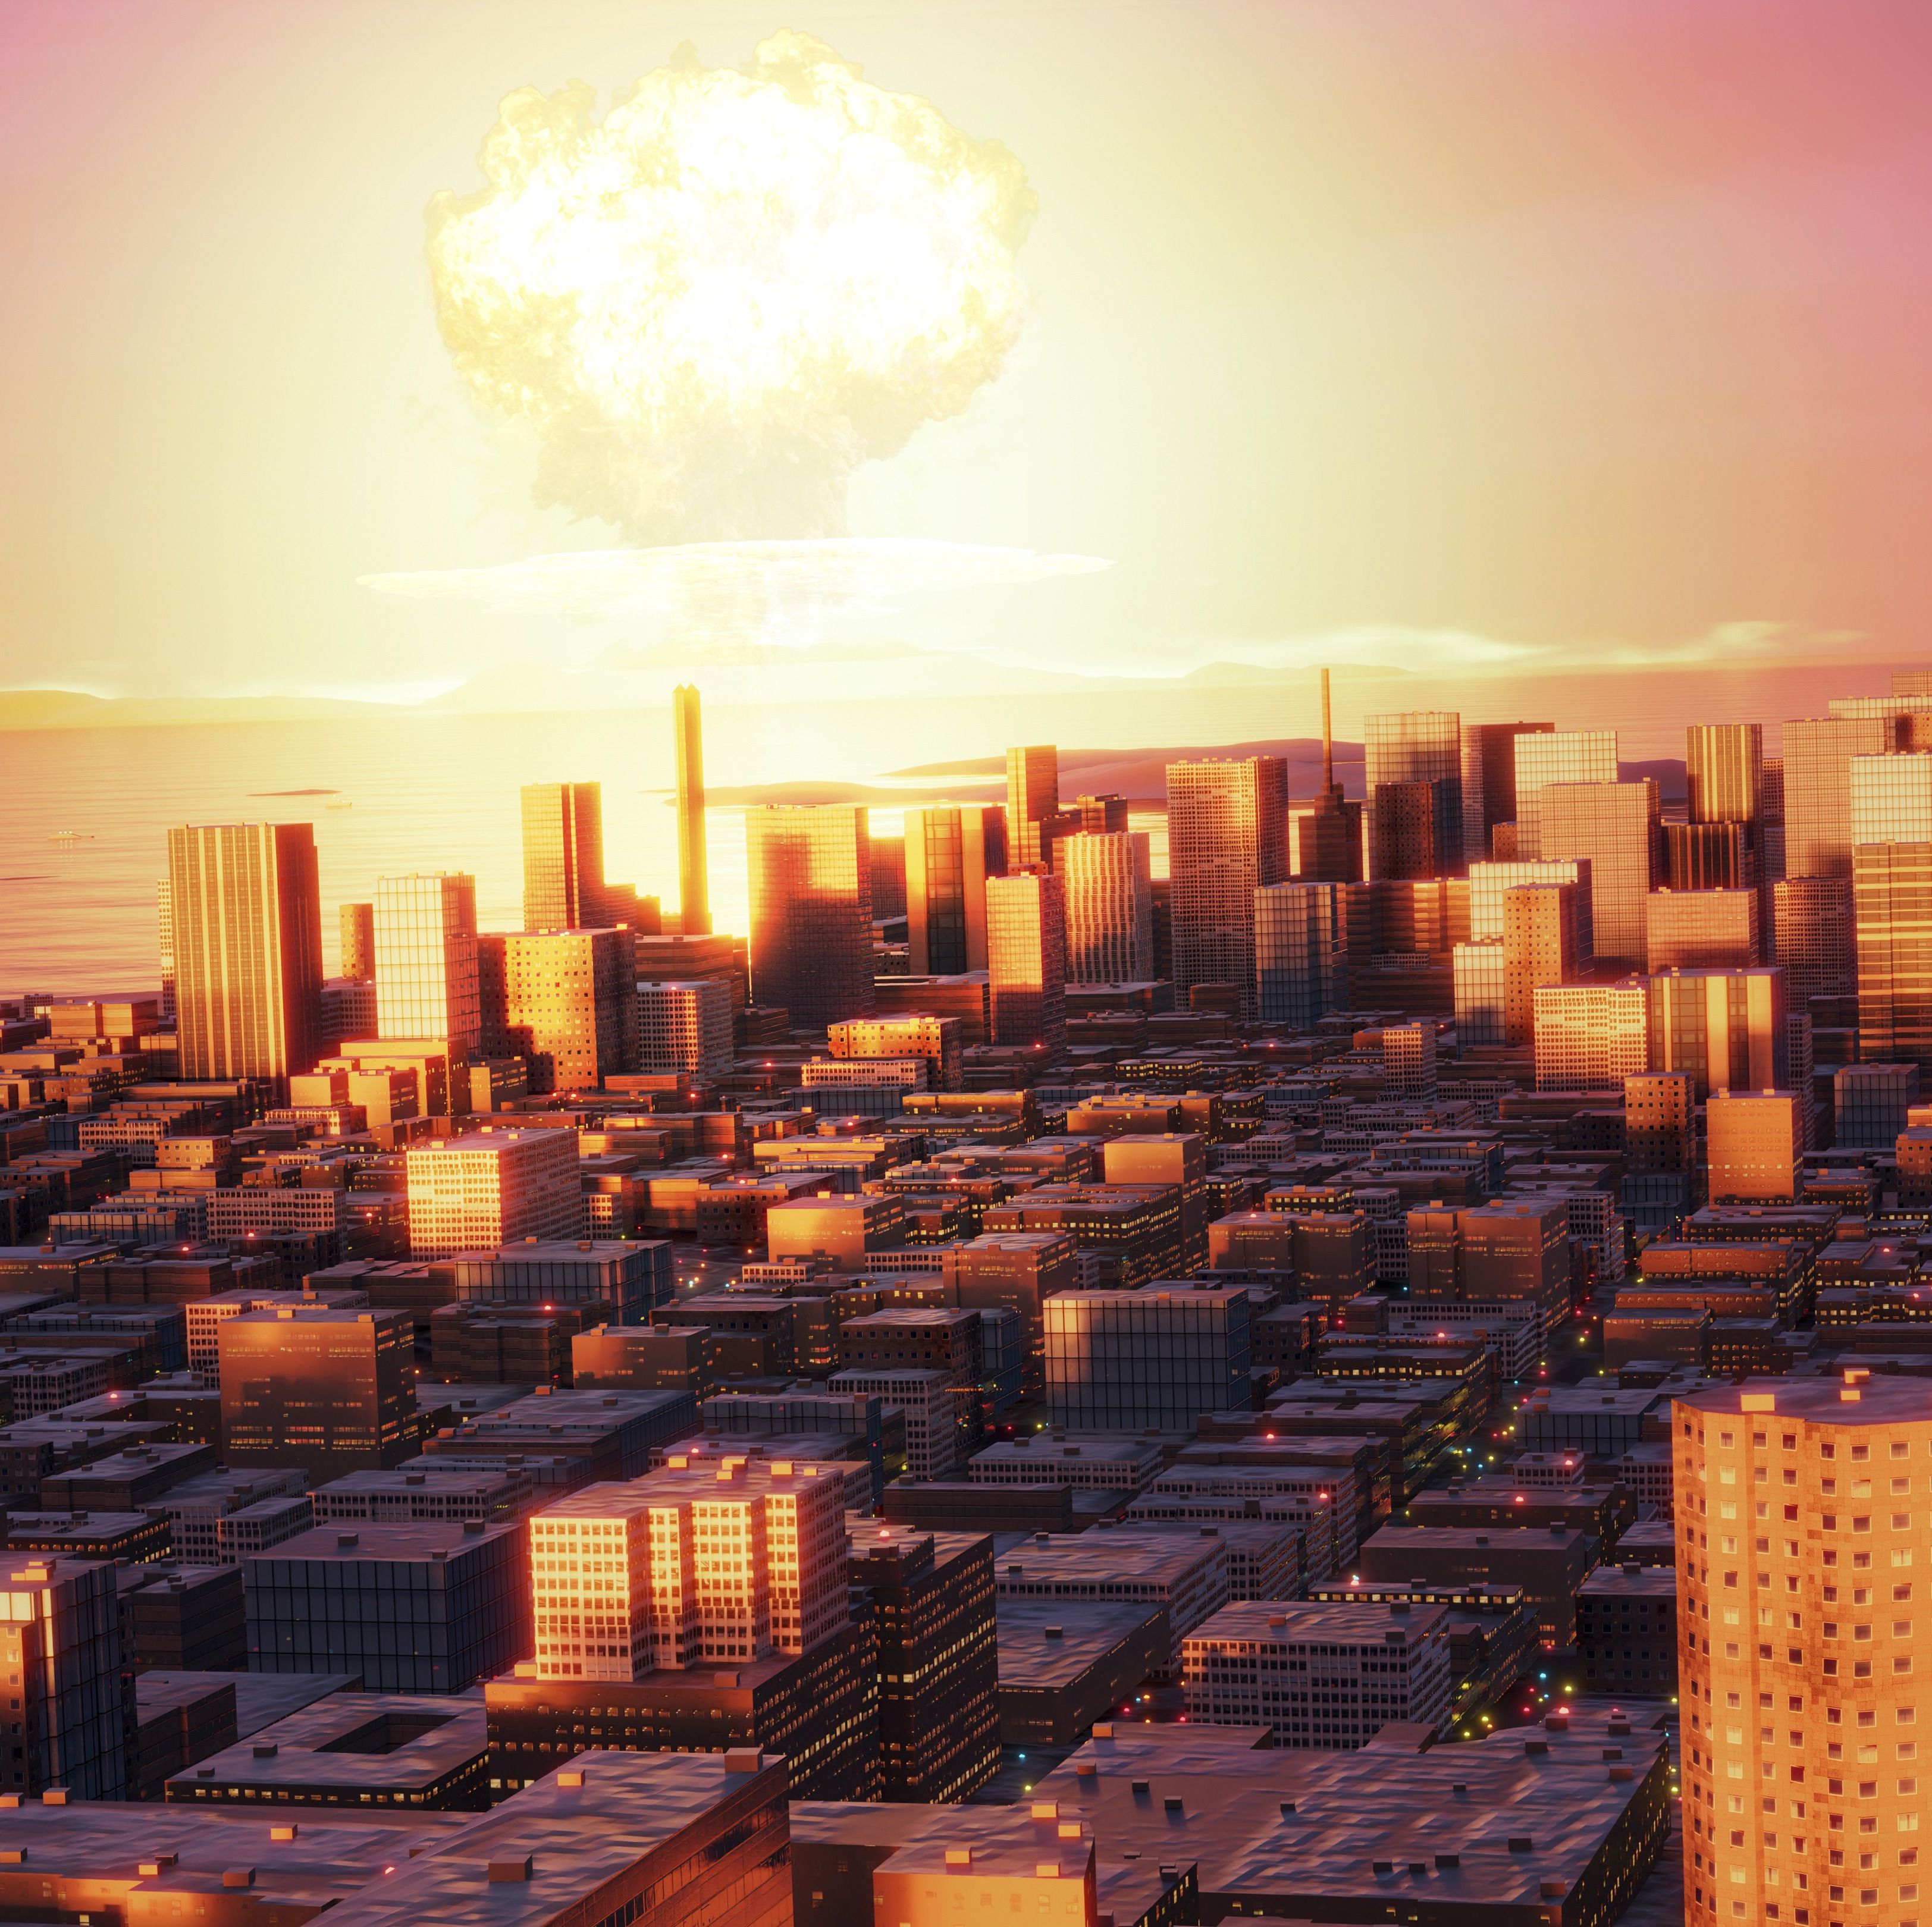 NYC Officials on Surviving a Nuclear Attack: 'You Got This!'